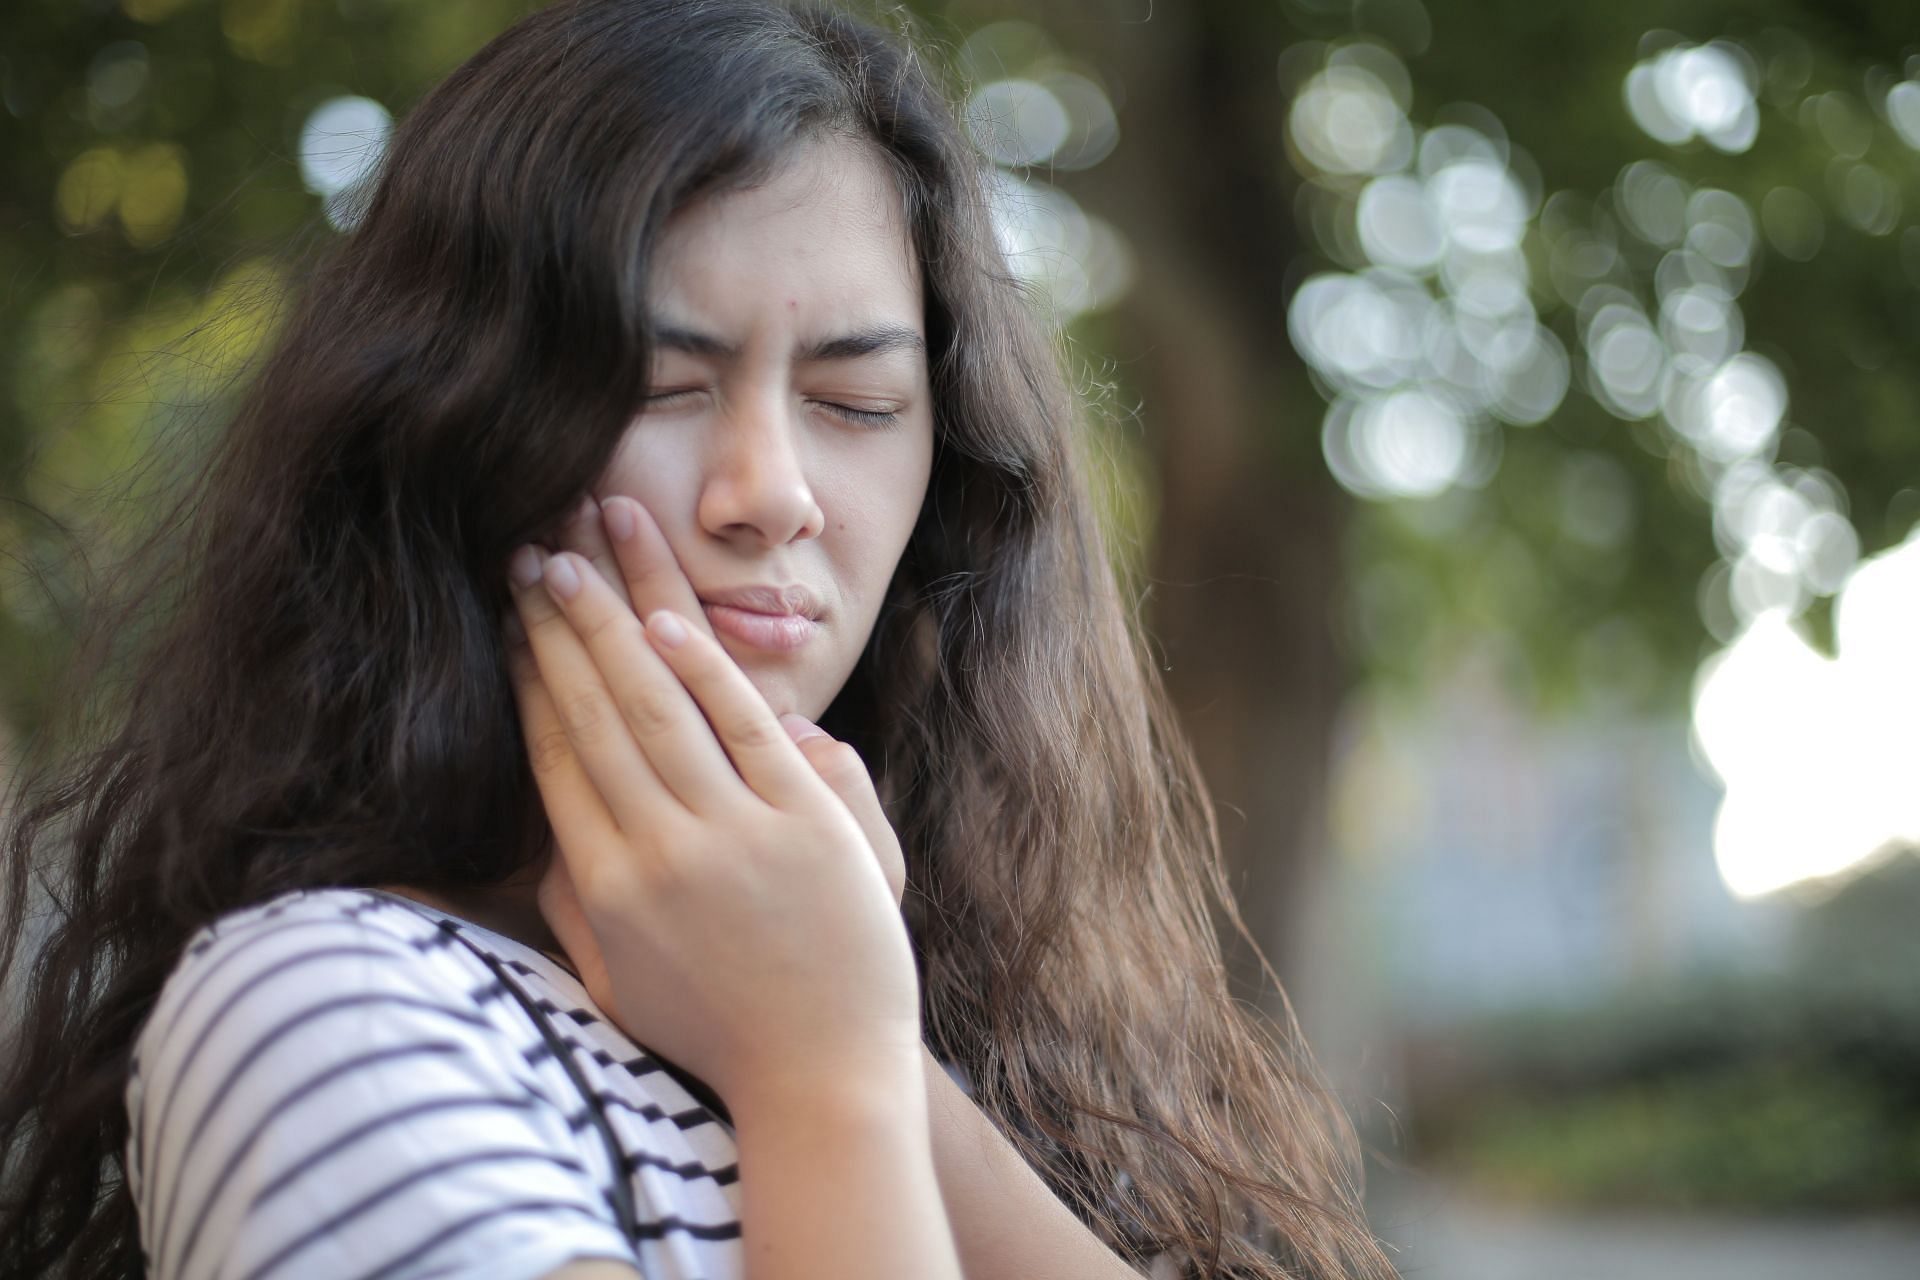 Essential oil for toothache (Image sourced via Pexels / Photo by Andrea Piacquadio)